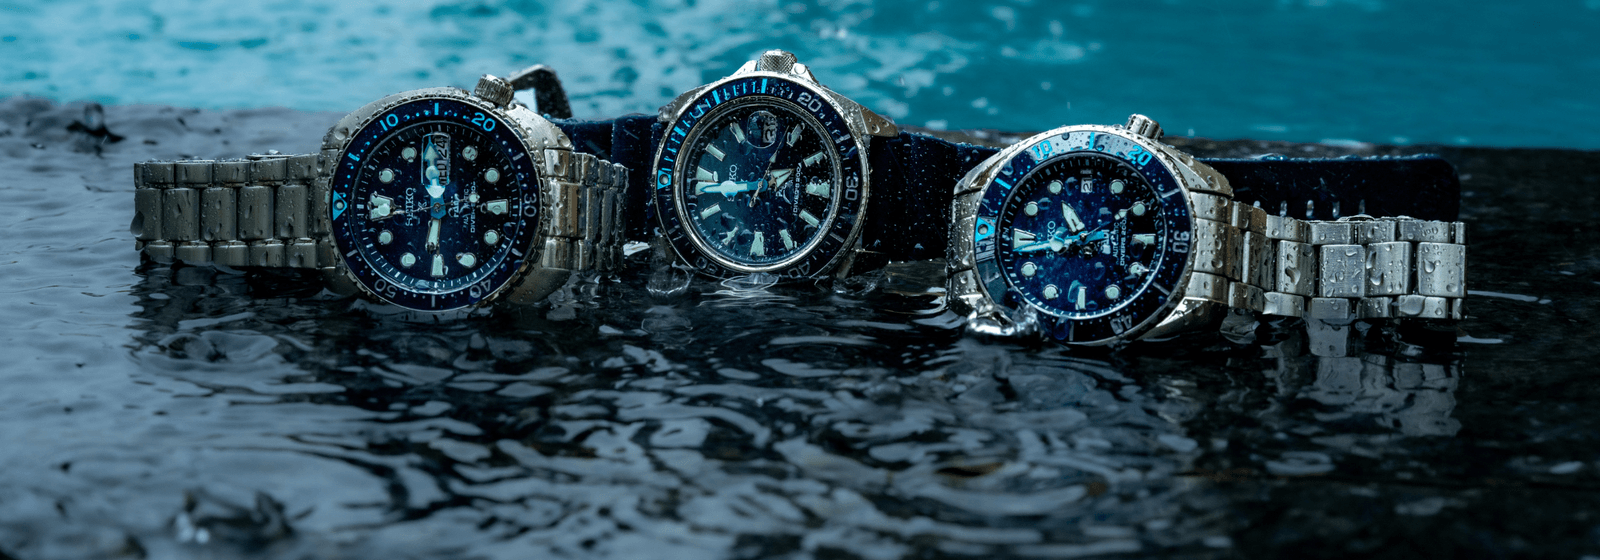 Attention Adventure Seekers: The Seiko Prospex Collection Awaits